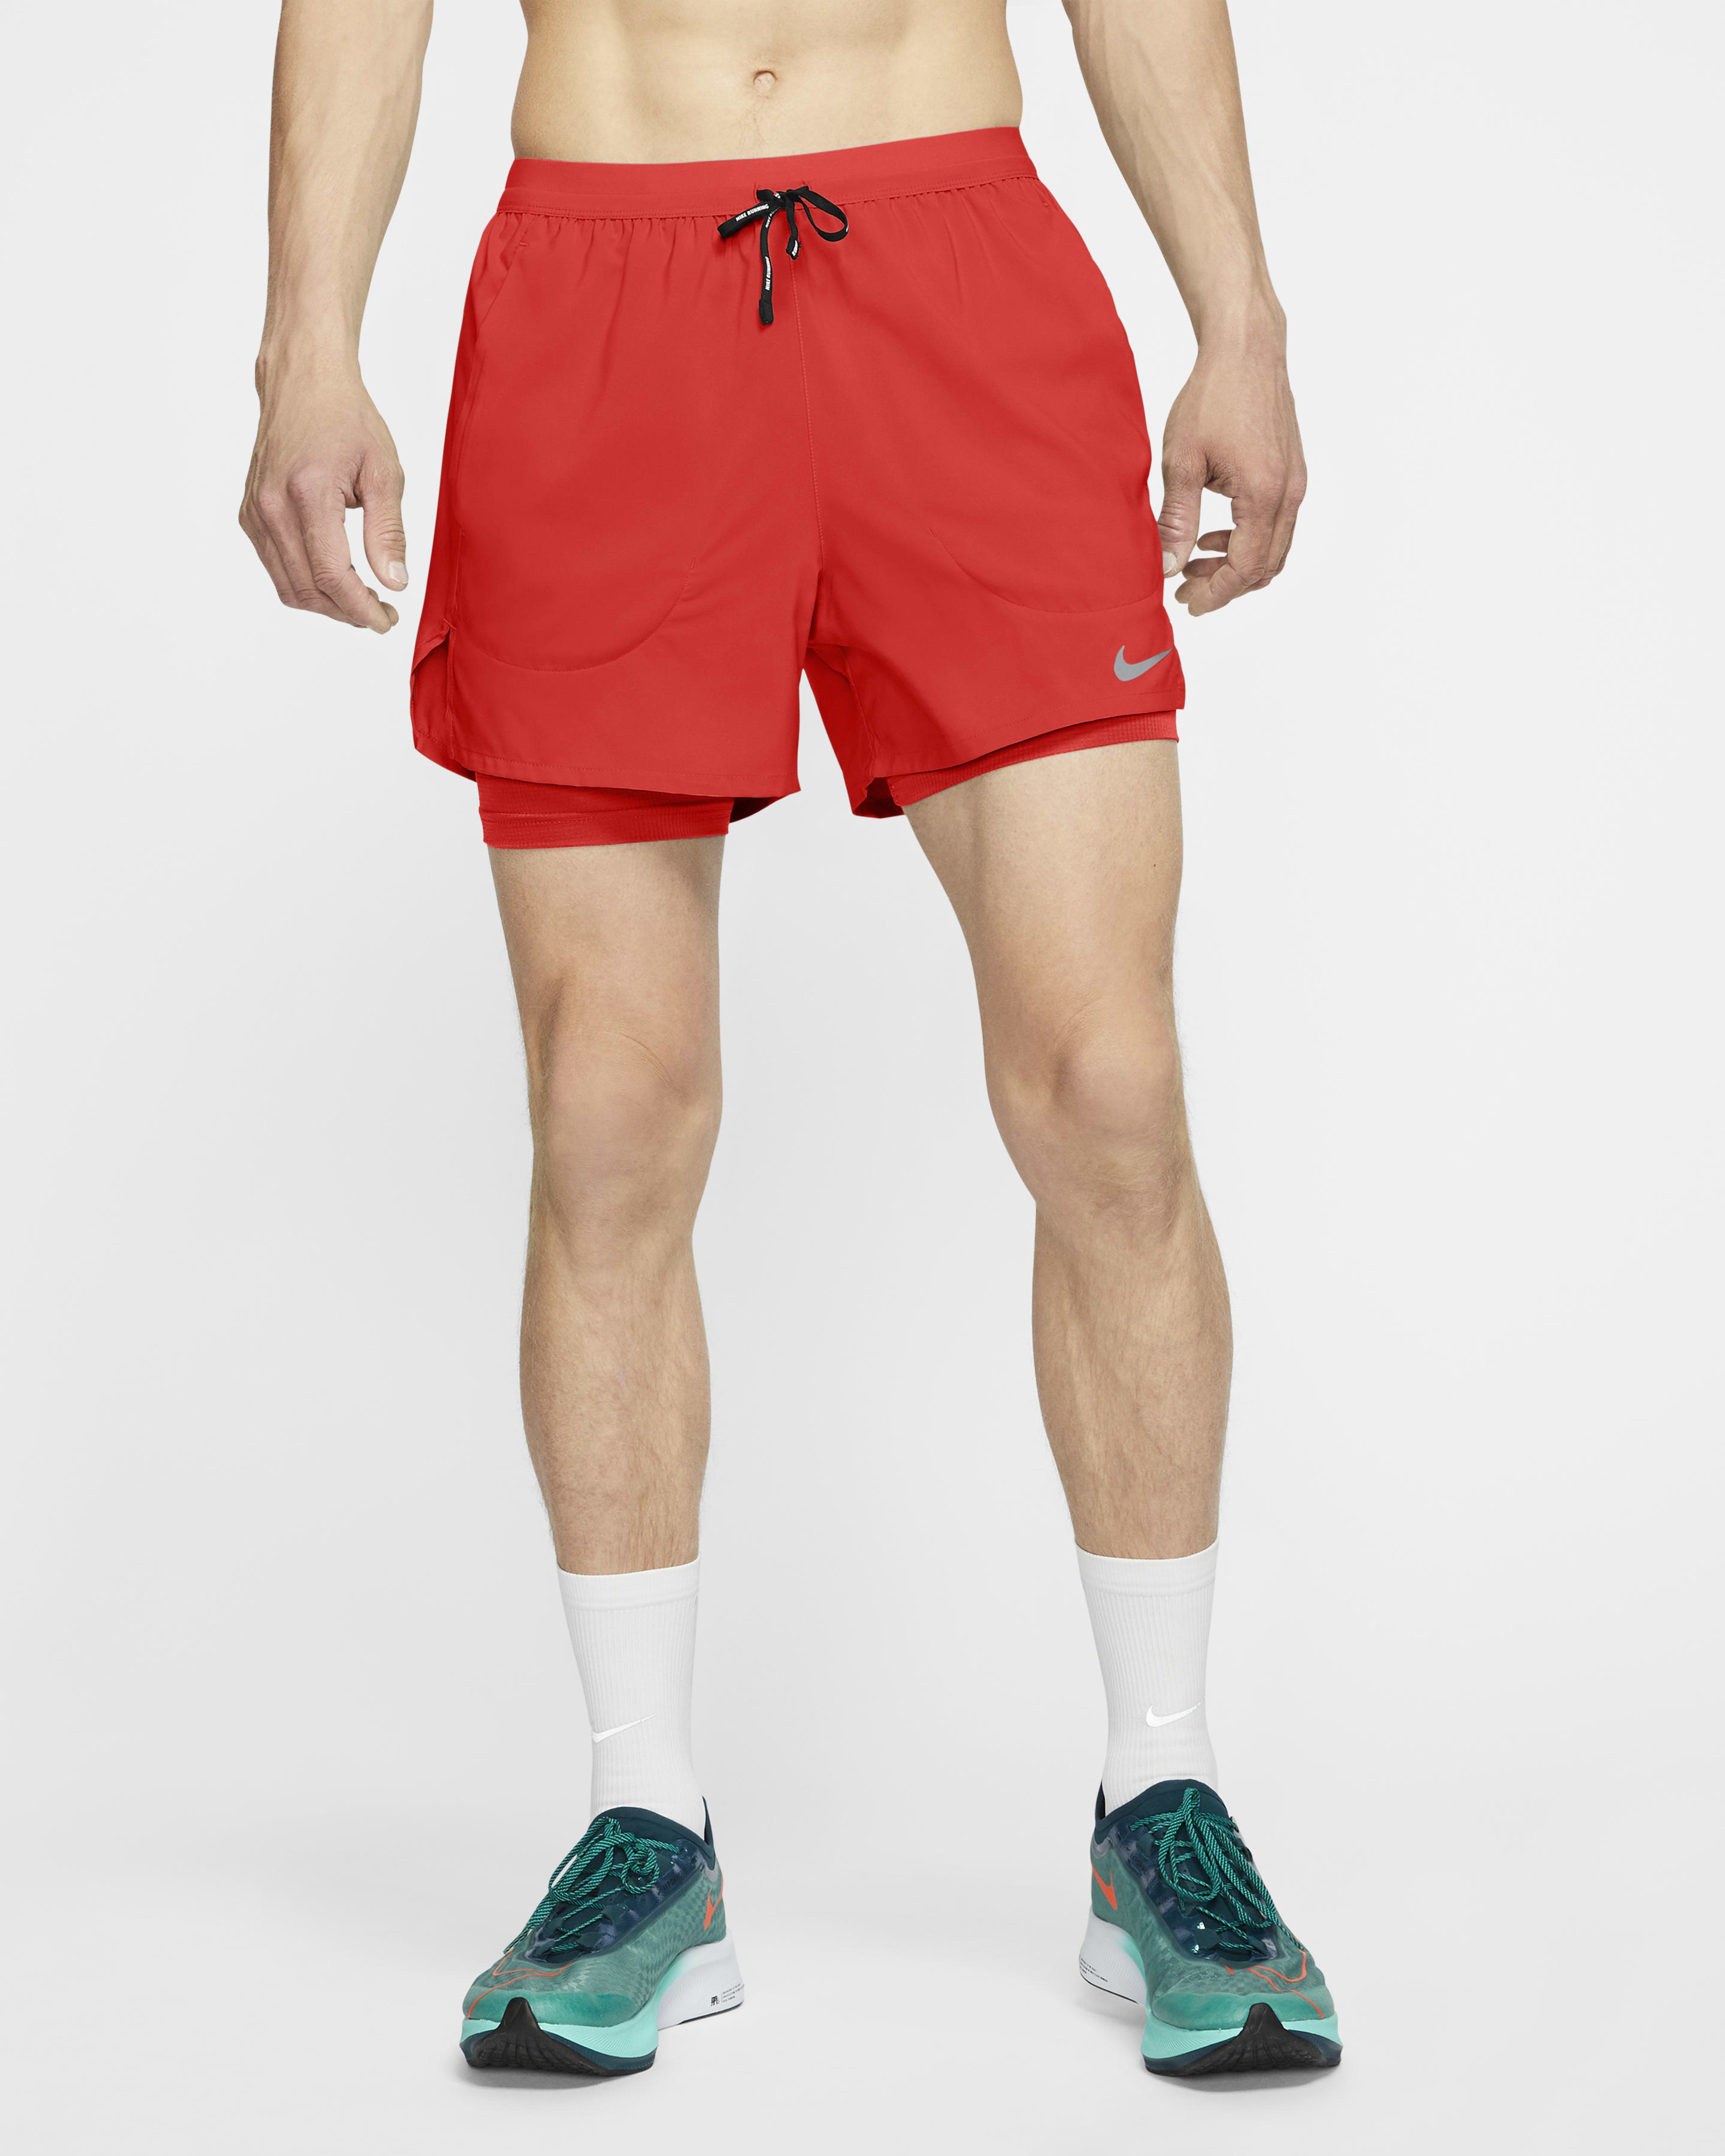 World's Best Running Shorts-II + Smartphone Pant & more.. by